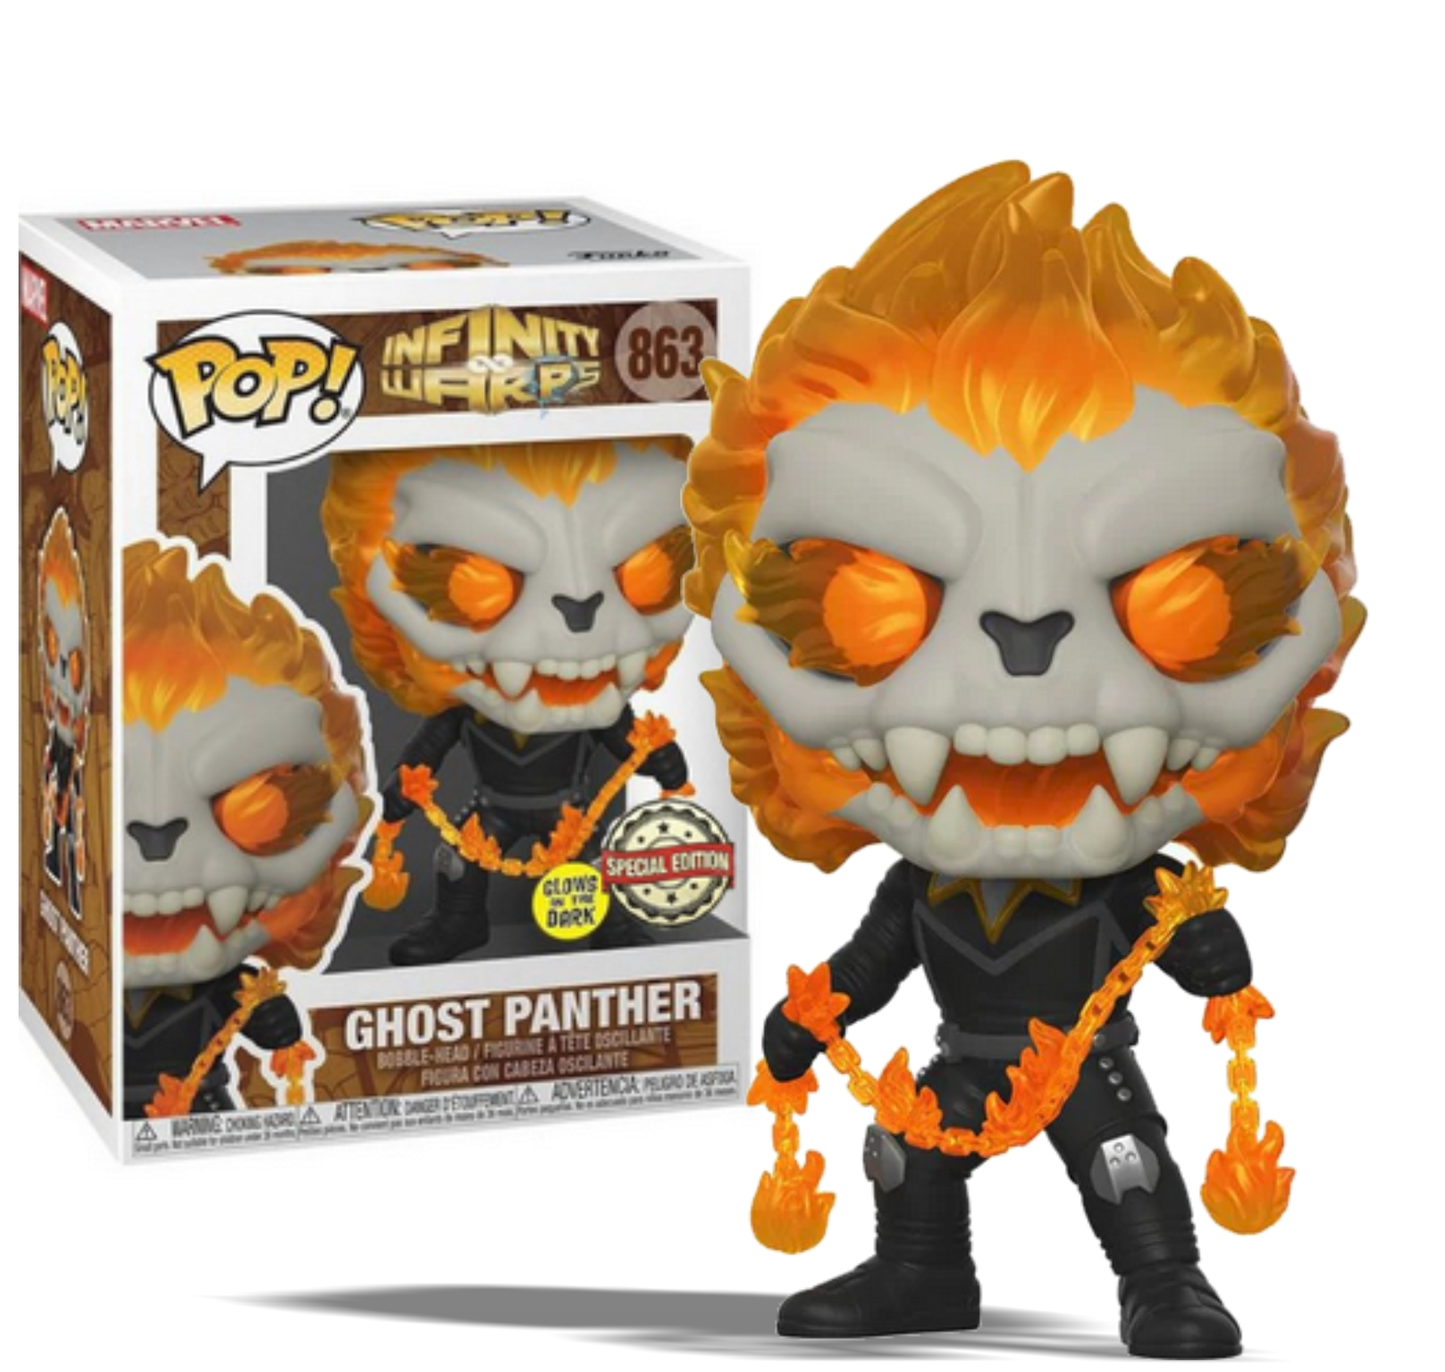 Ghost Panther With Chain Marvel Infinity Warps Special Edition GITD Funko Pop! Vinyl